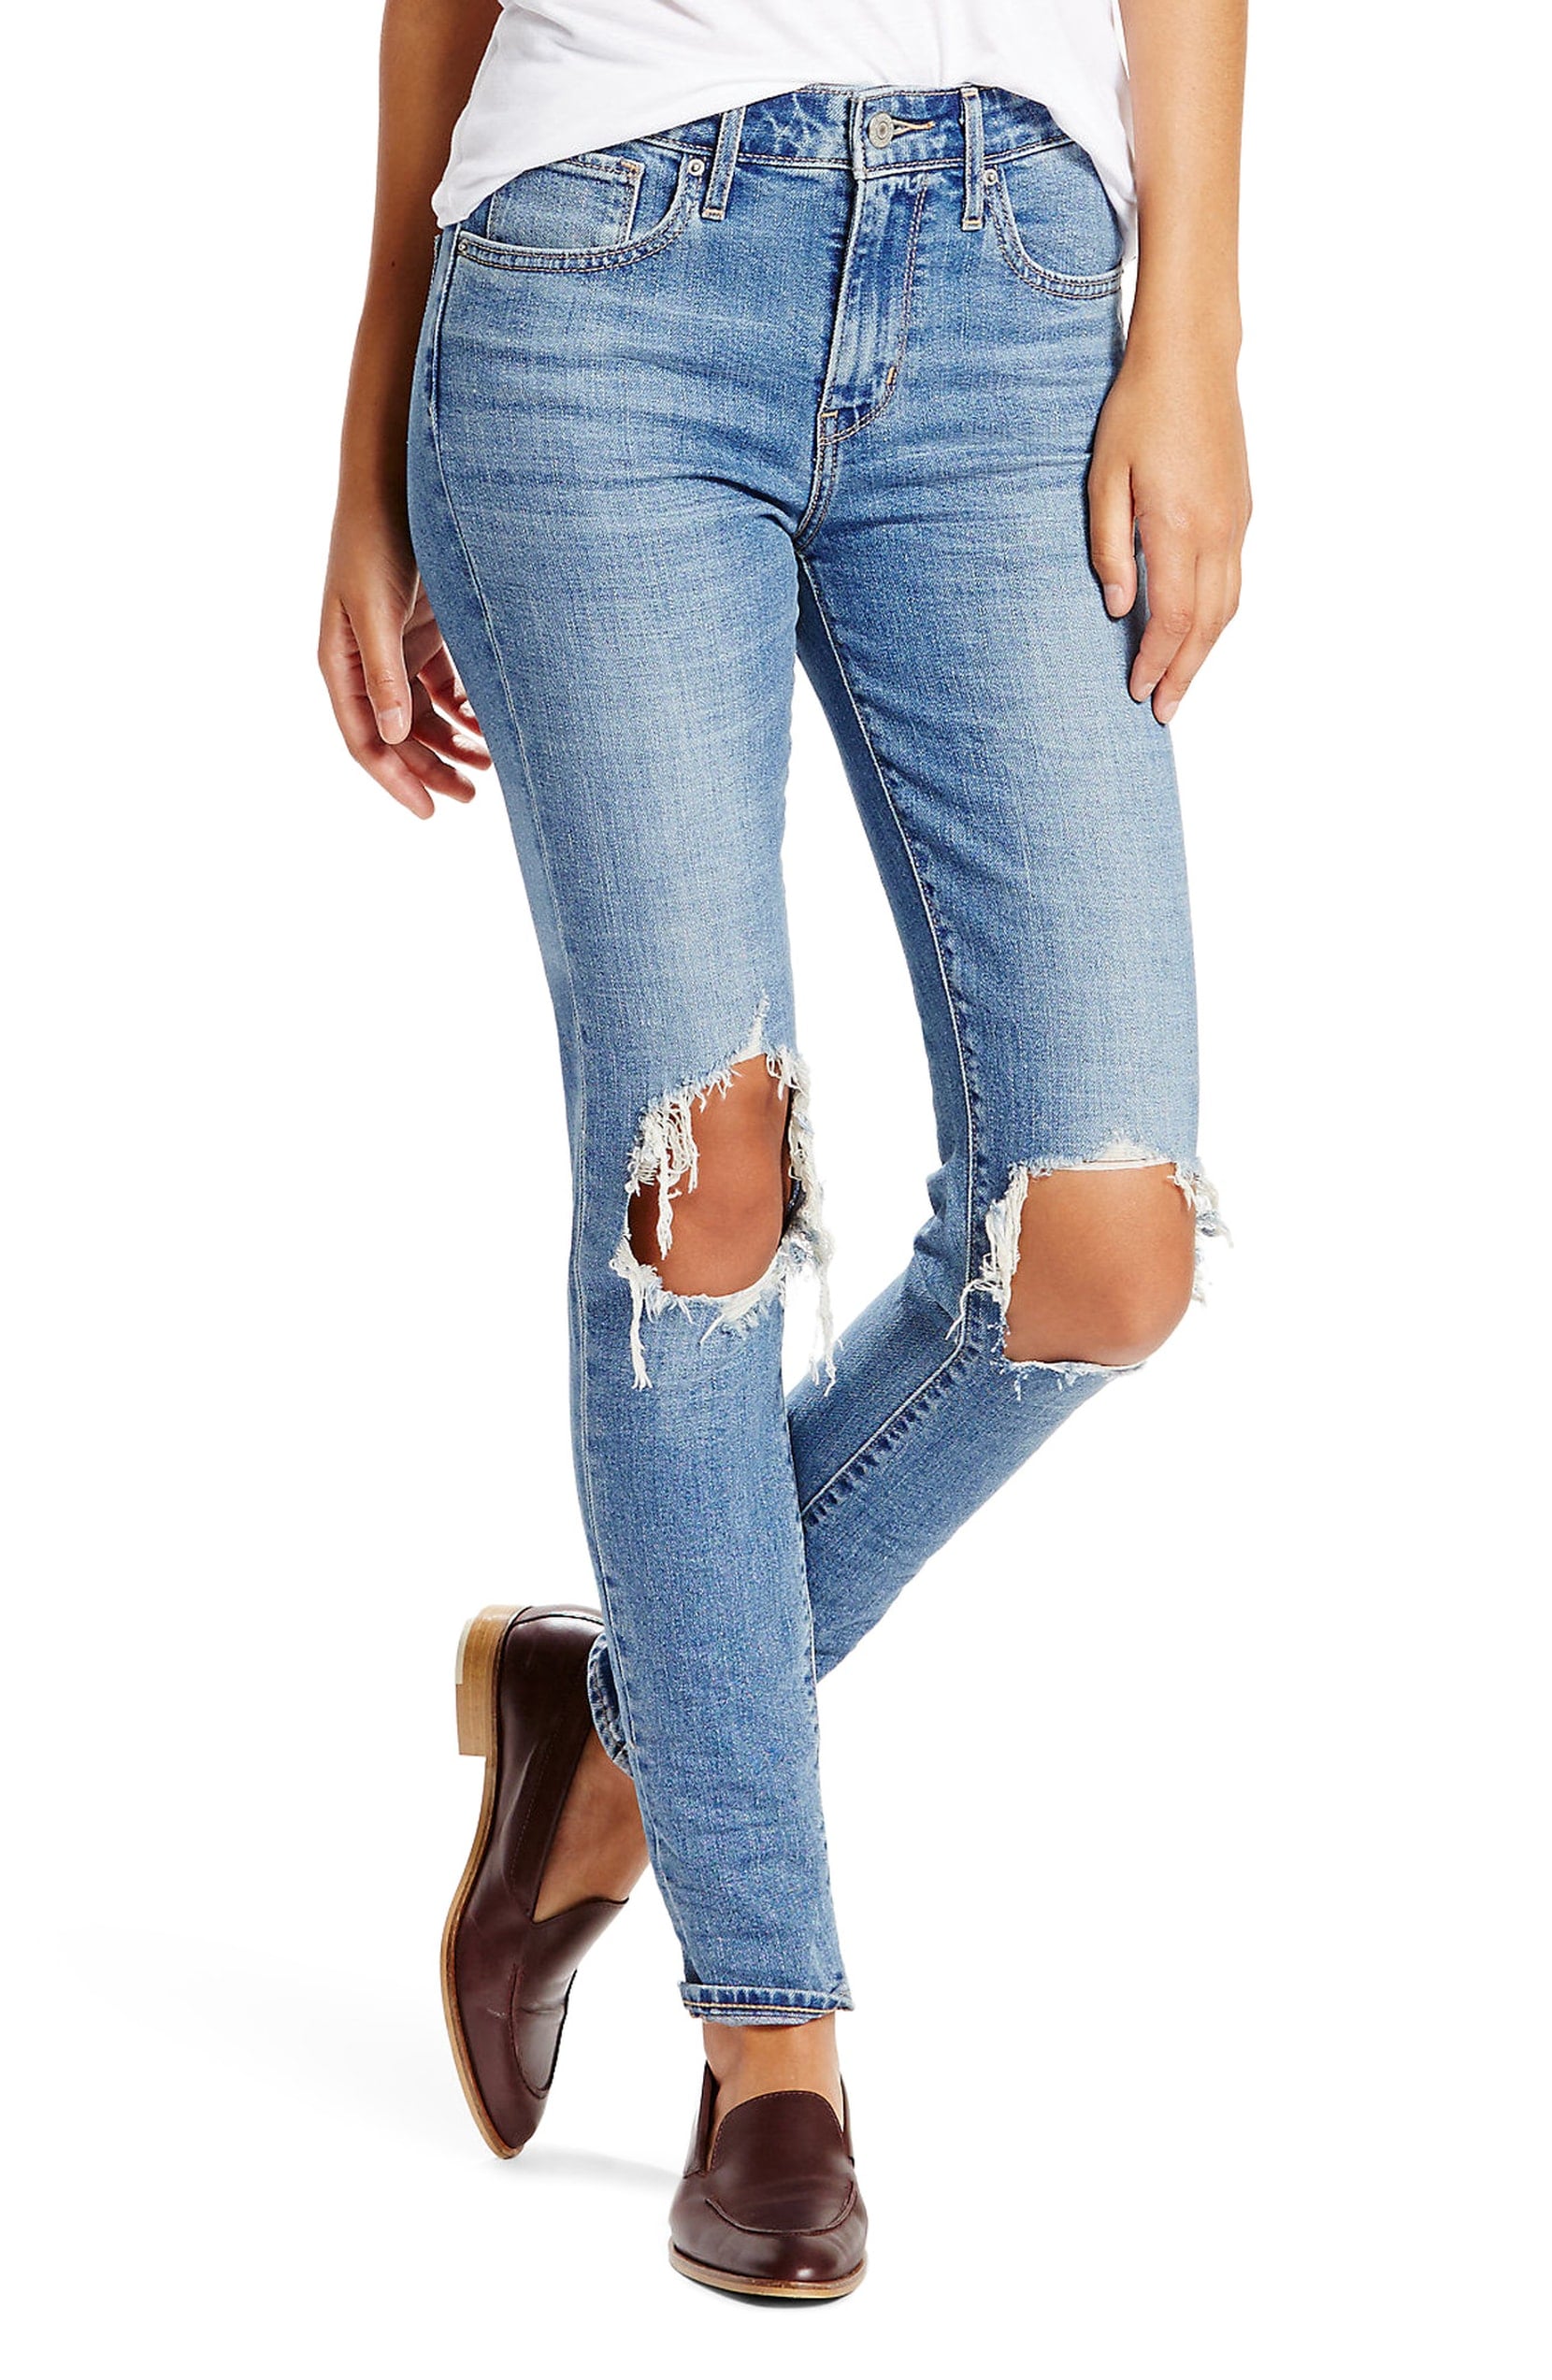 Levi's 721 Ripped High Waist Skinny Jeans | Every Single Pair of Jeans We  Love This Season | POPSUGAR Fashion Photo 22